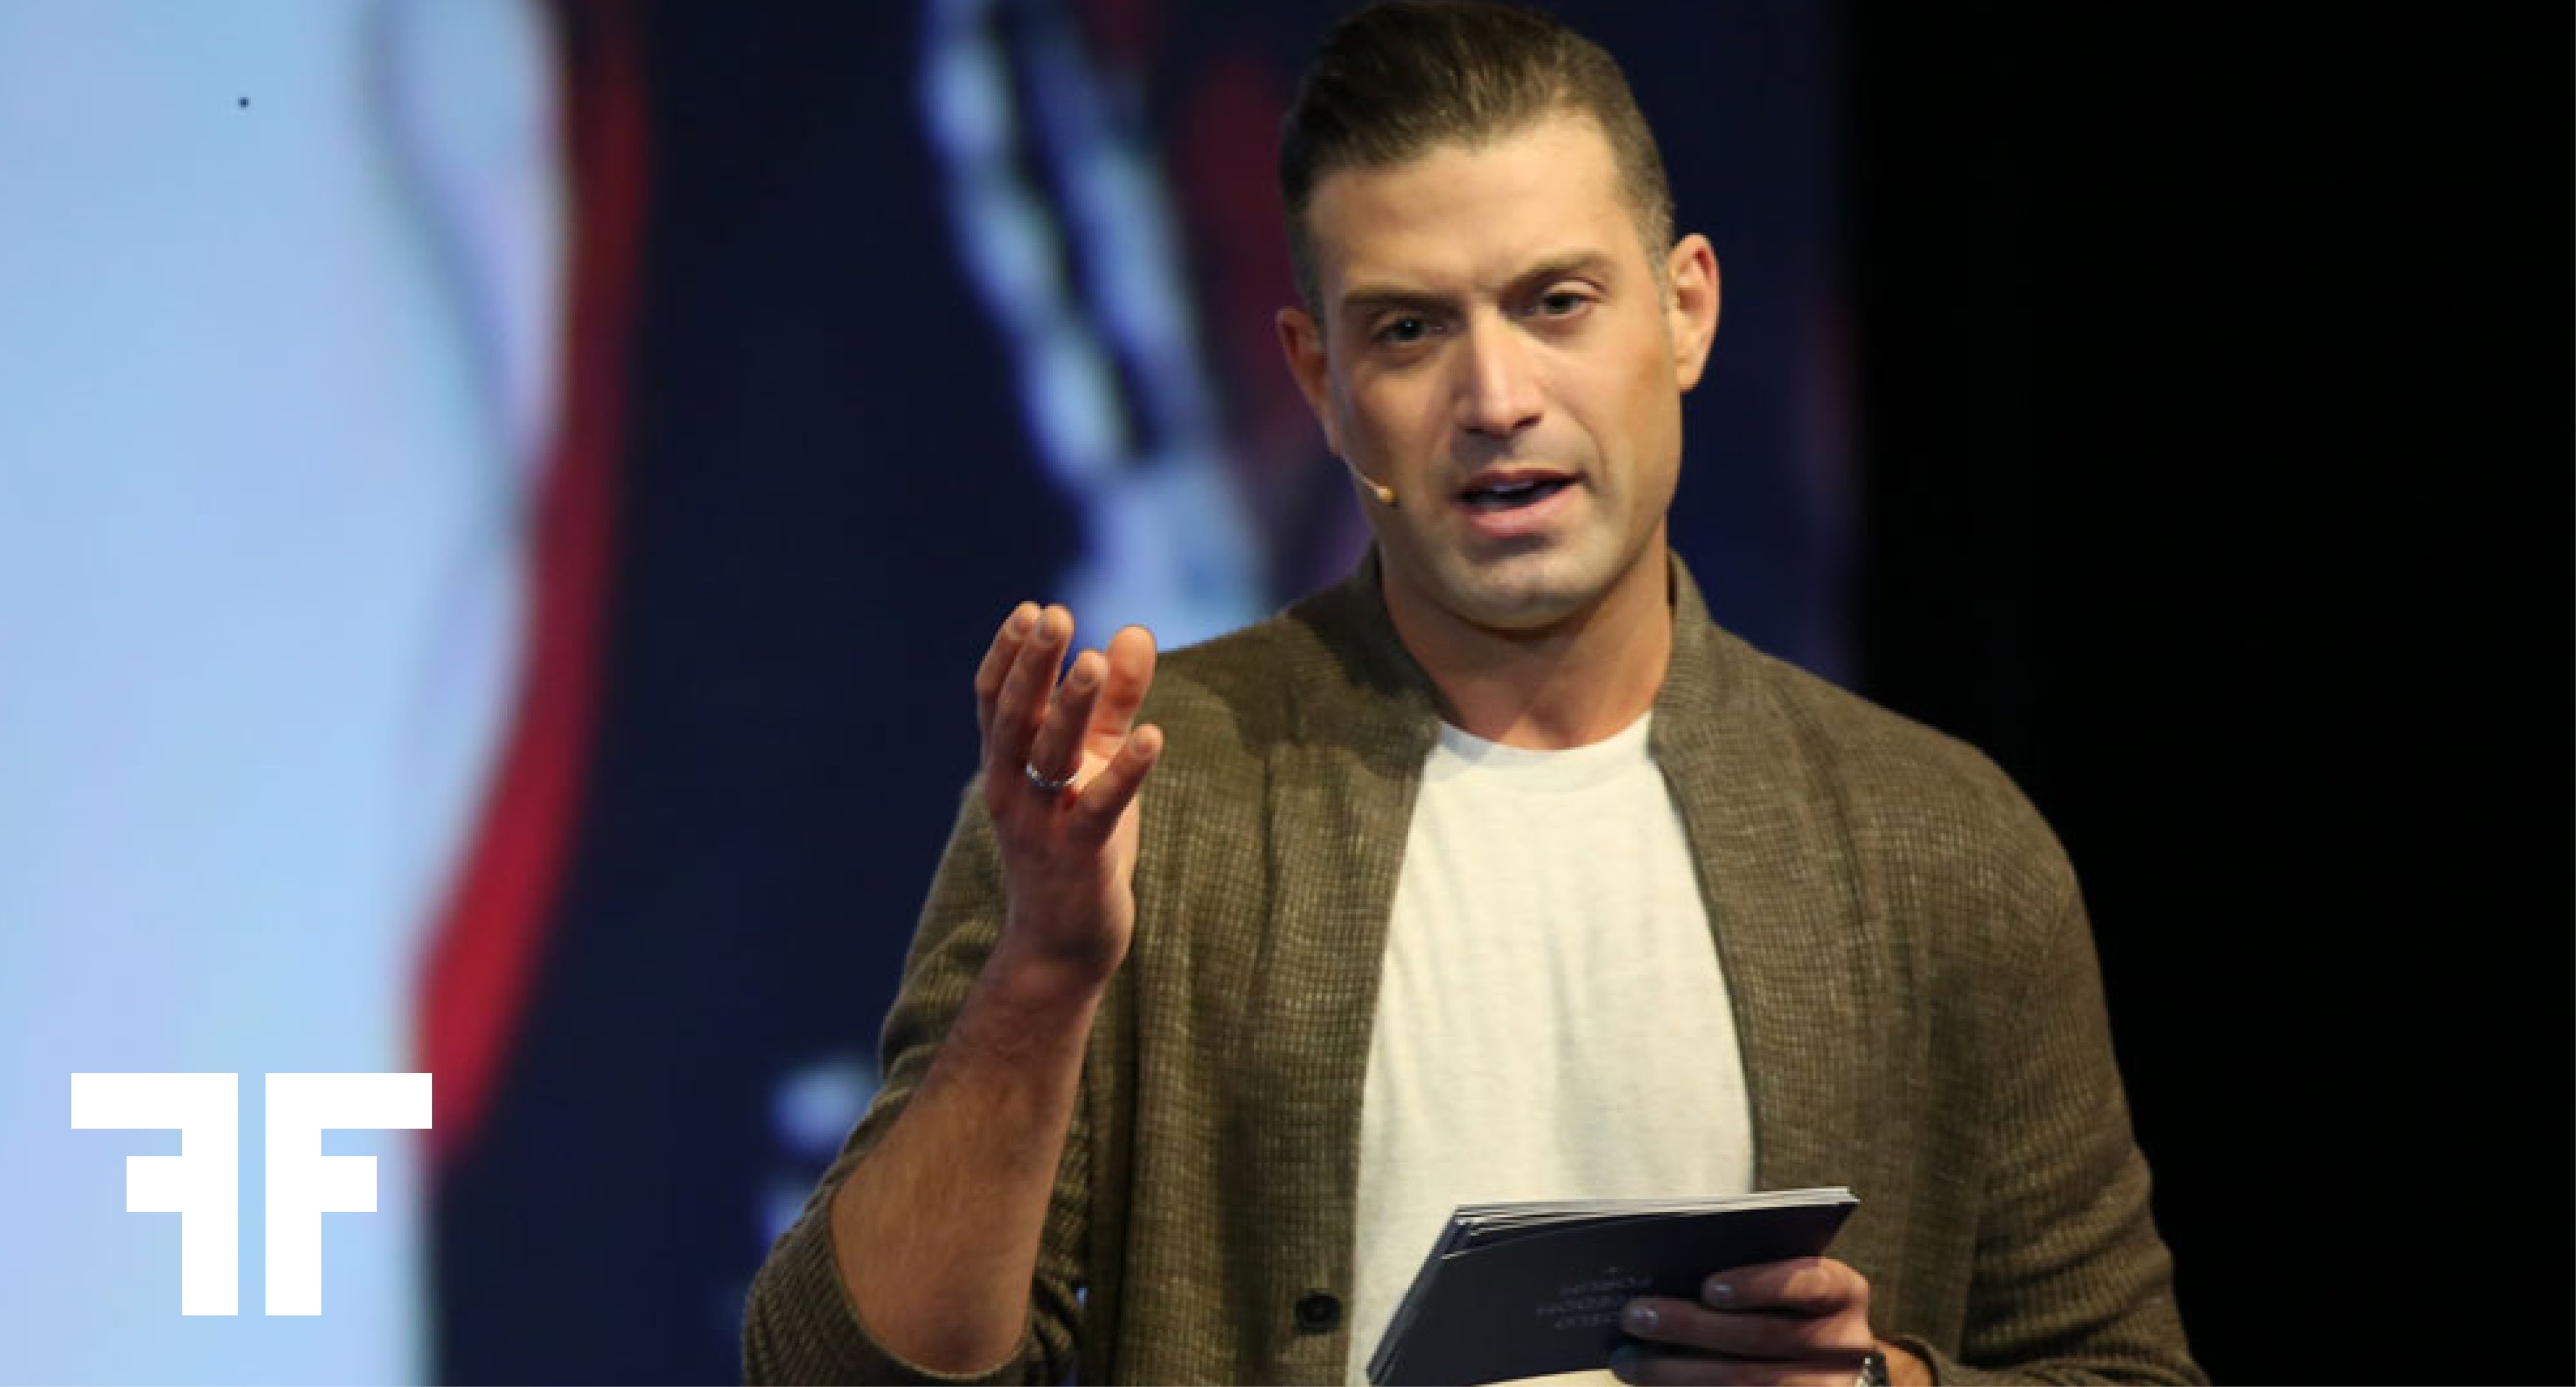 OMAR SHARIF JR. | COMING OUT IN THE MIDDLE OF A REVOLUTION | 2016 ...